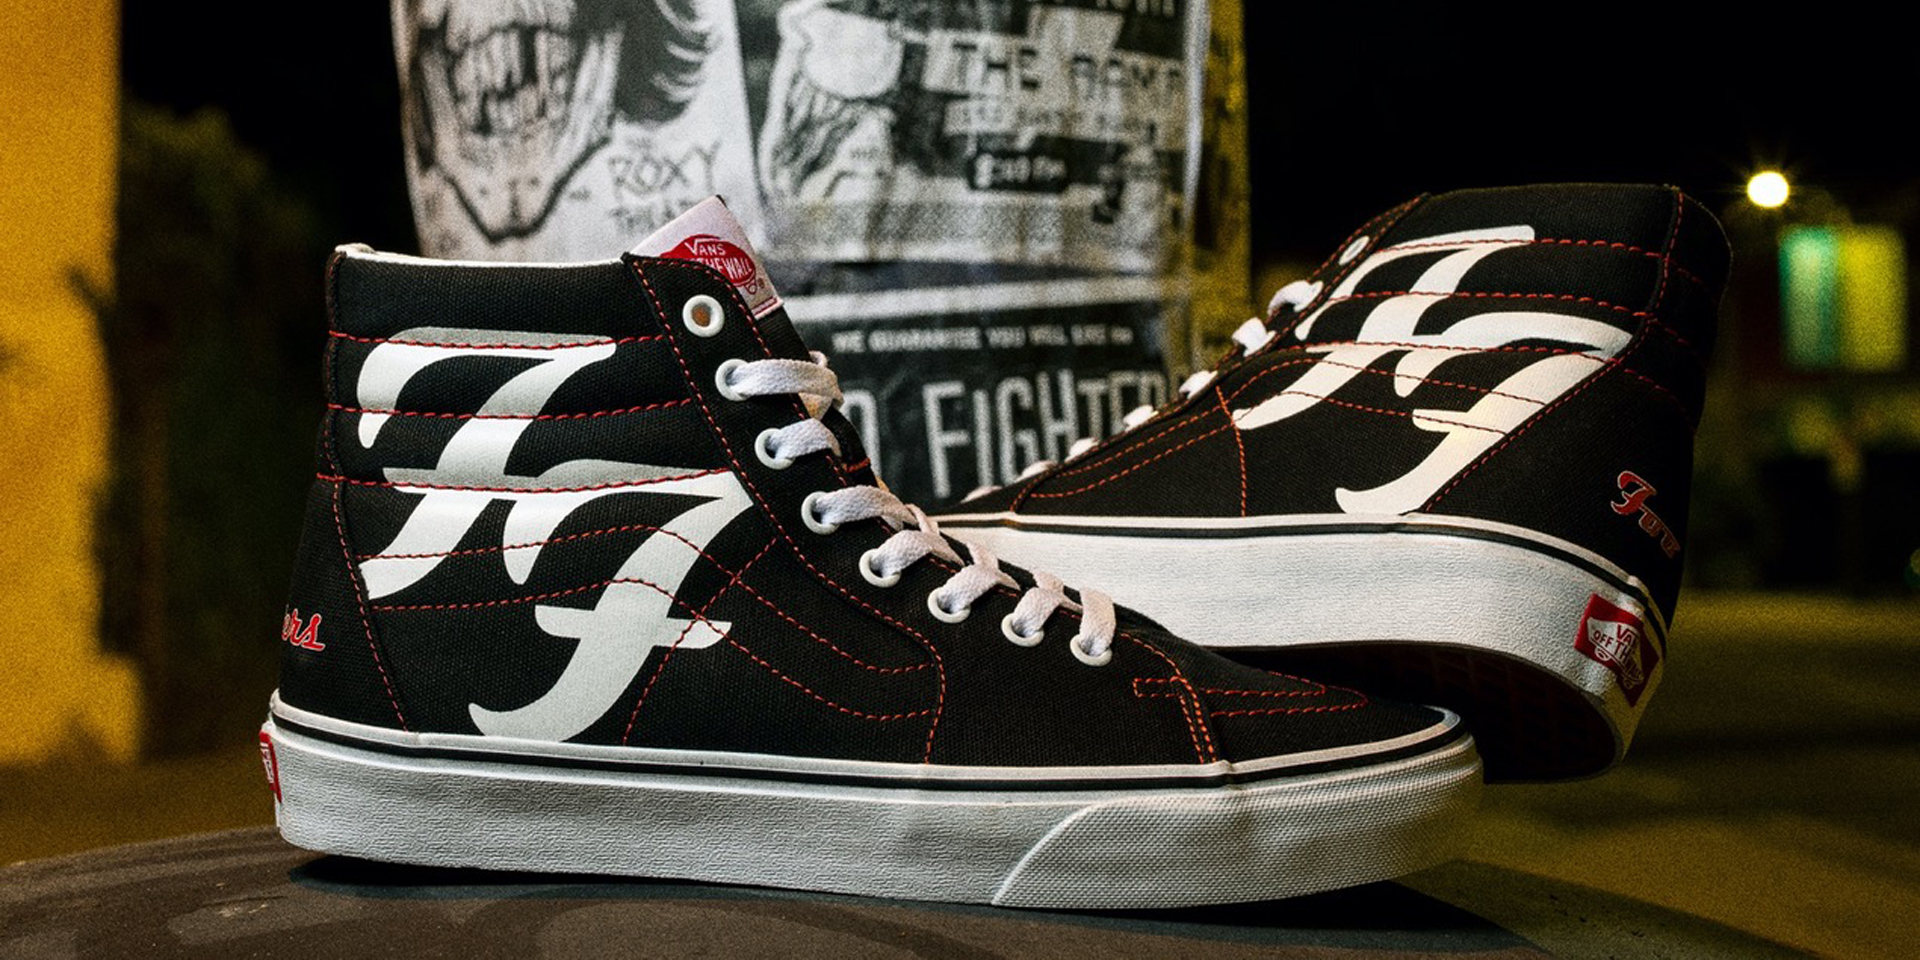 vans limited edition indonesia